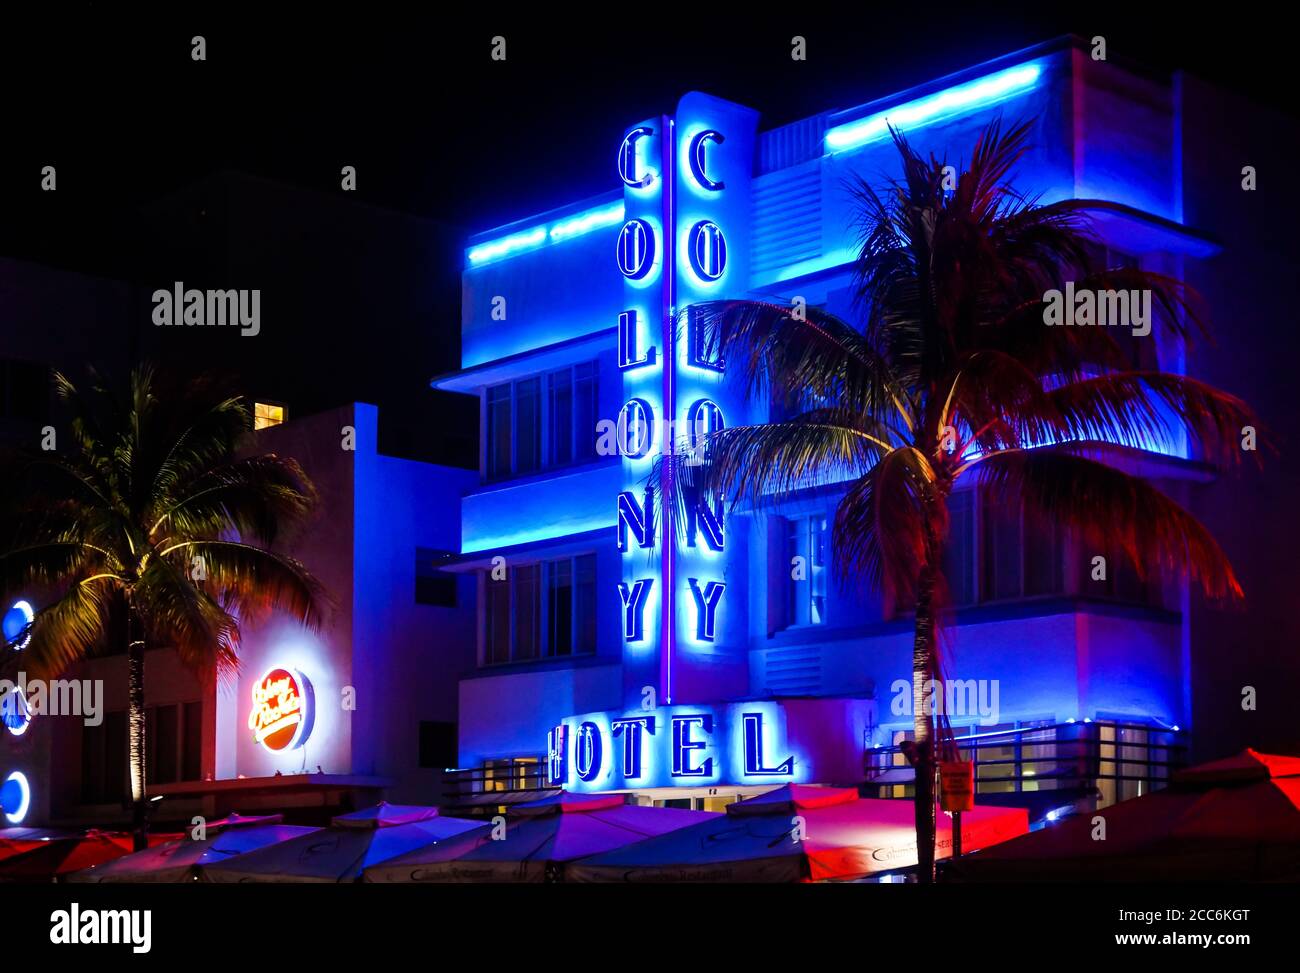 South Beach, Florida - December 28, 2014: The Iconic Art Deco Hotel Colony at Night. Stock Photo